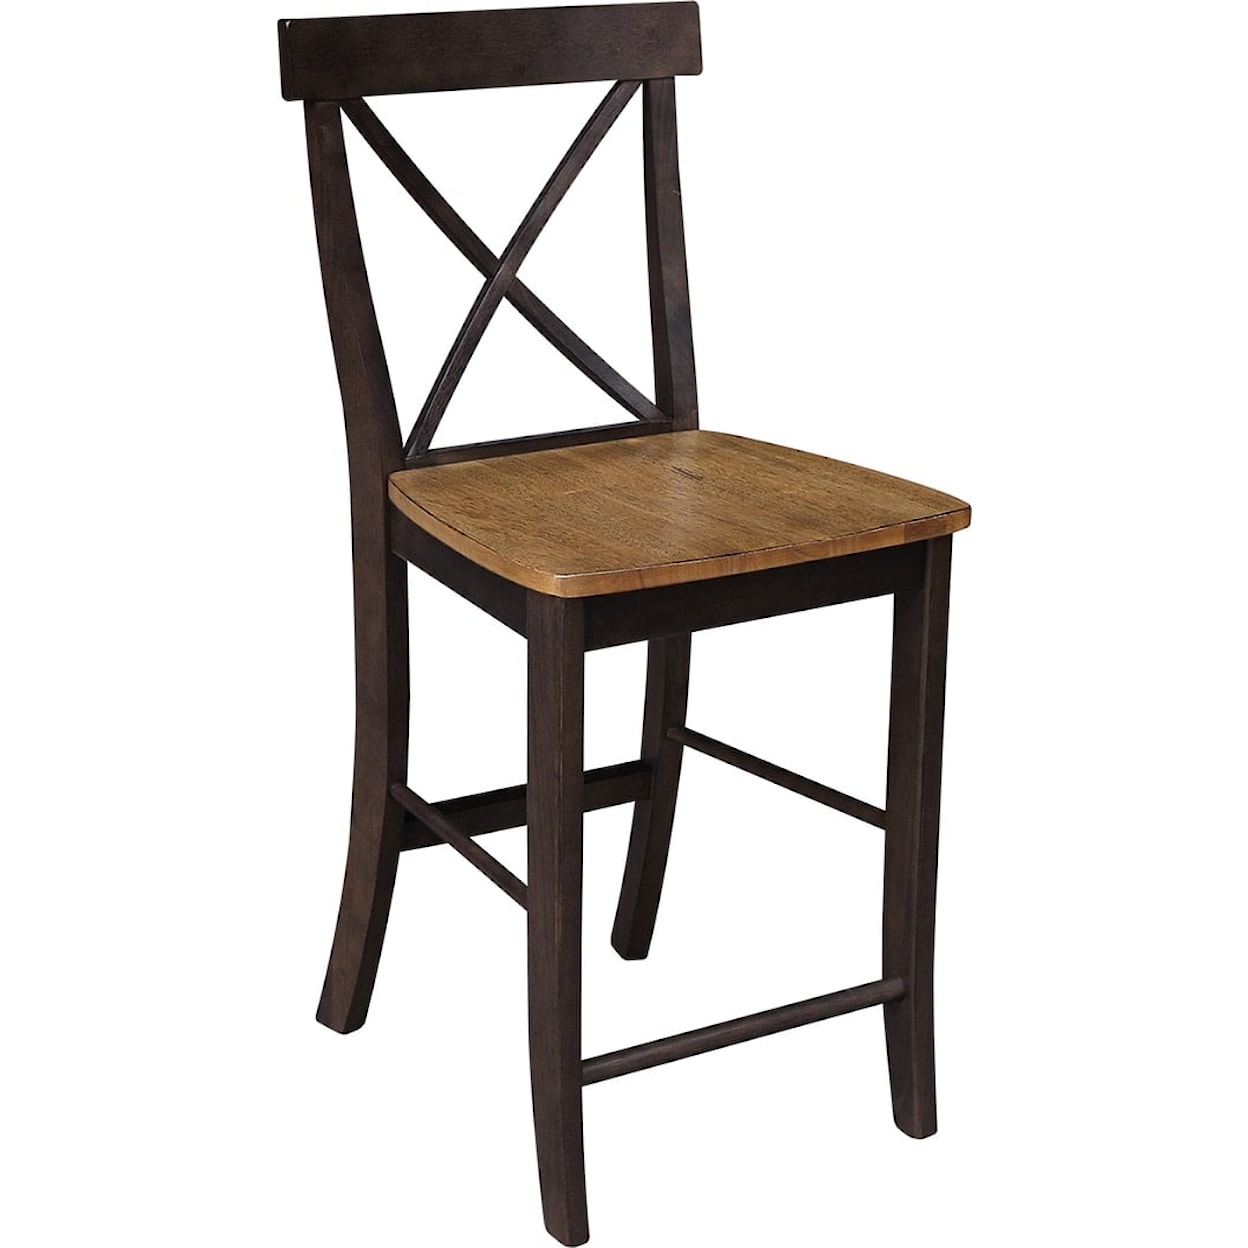 John Thomas Dining Essentials X-Back Stool in Hickory/Coal